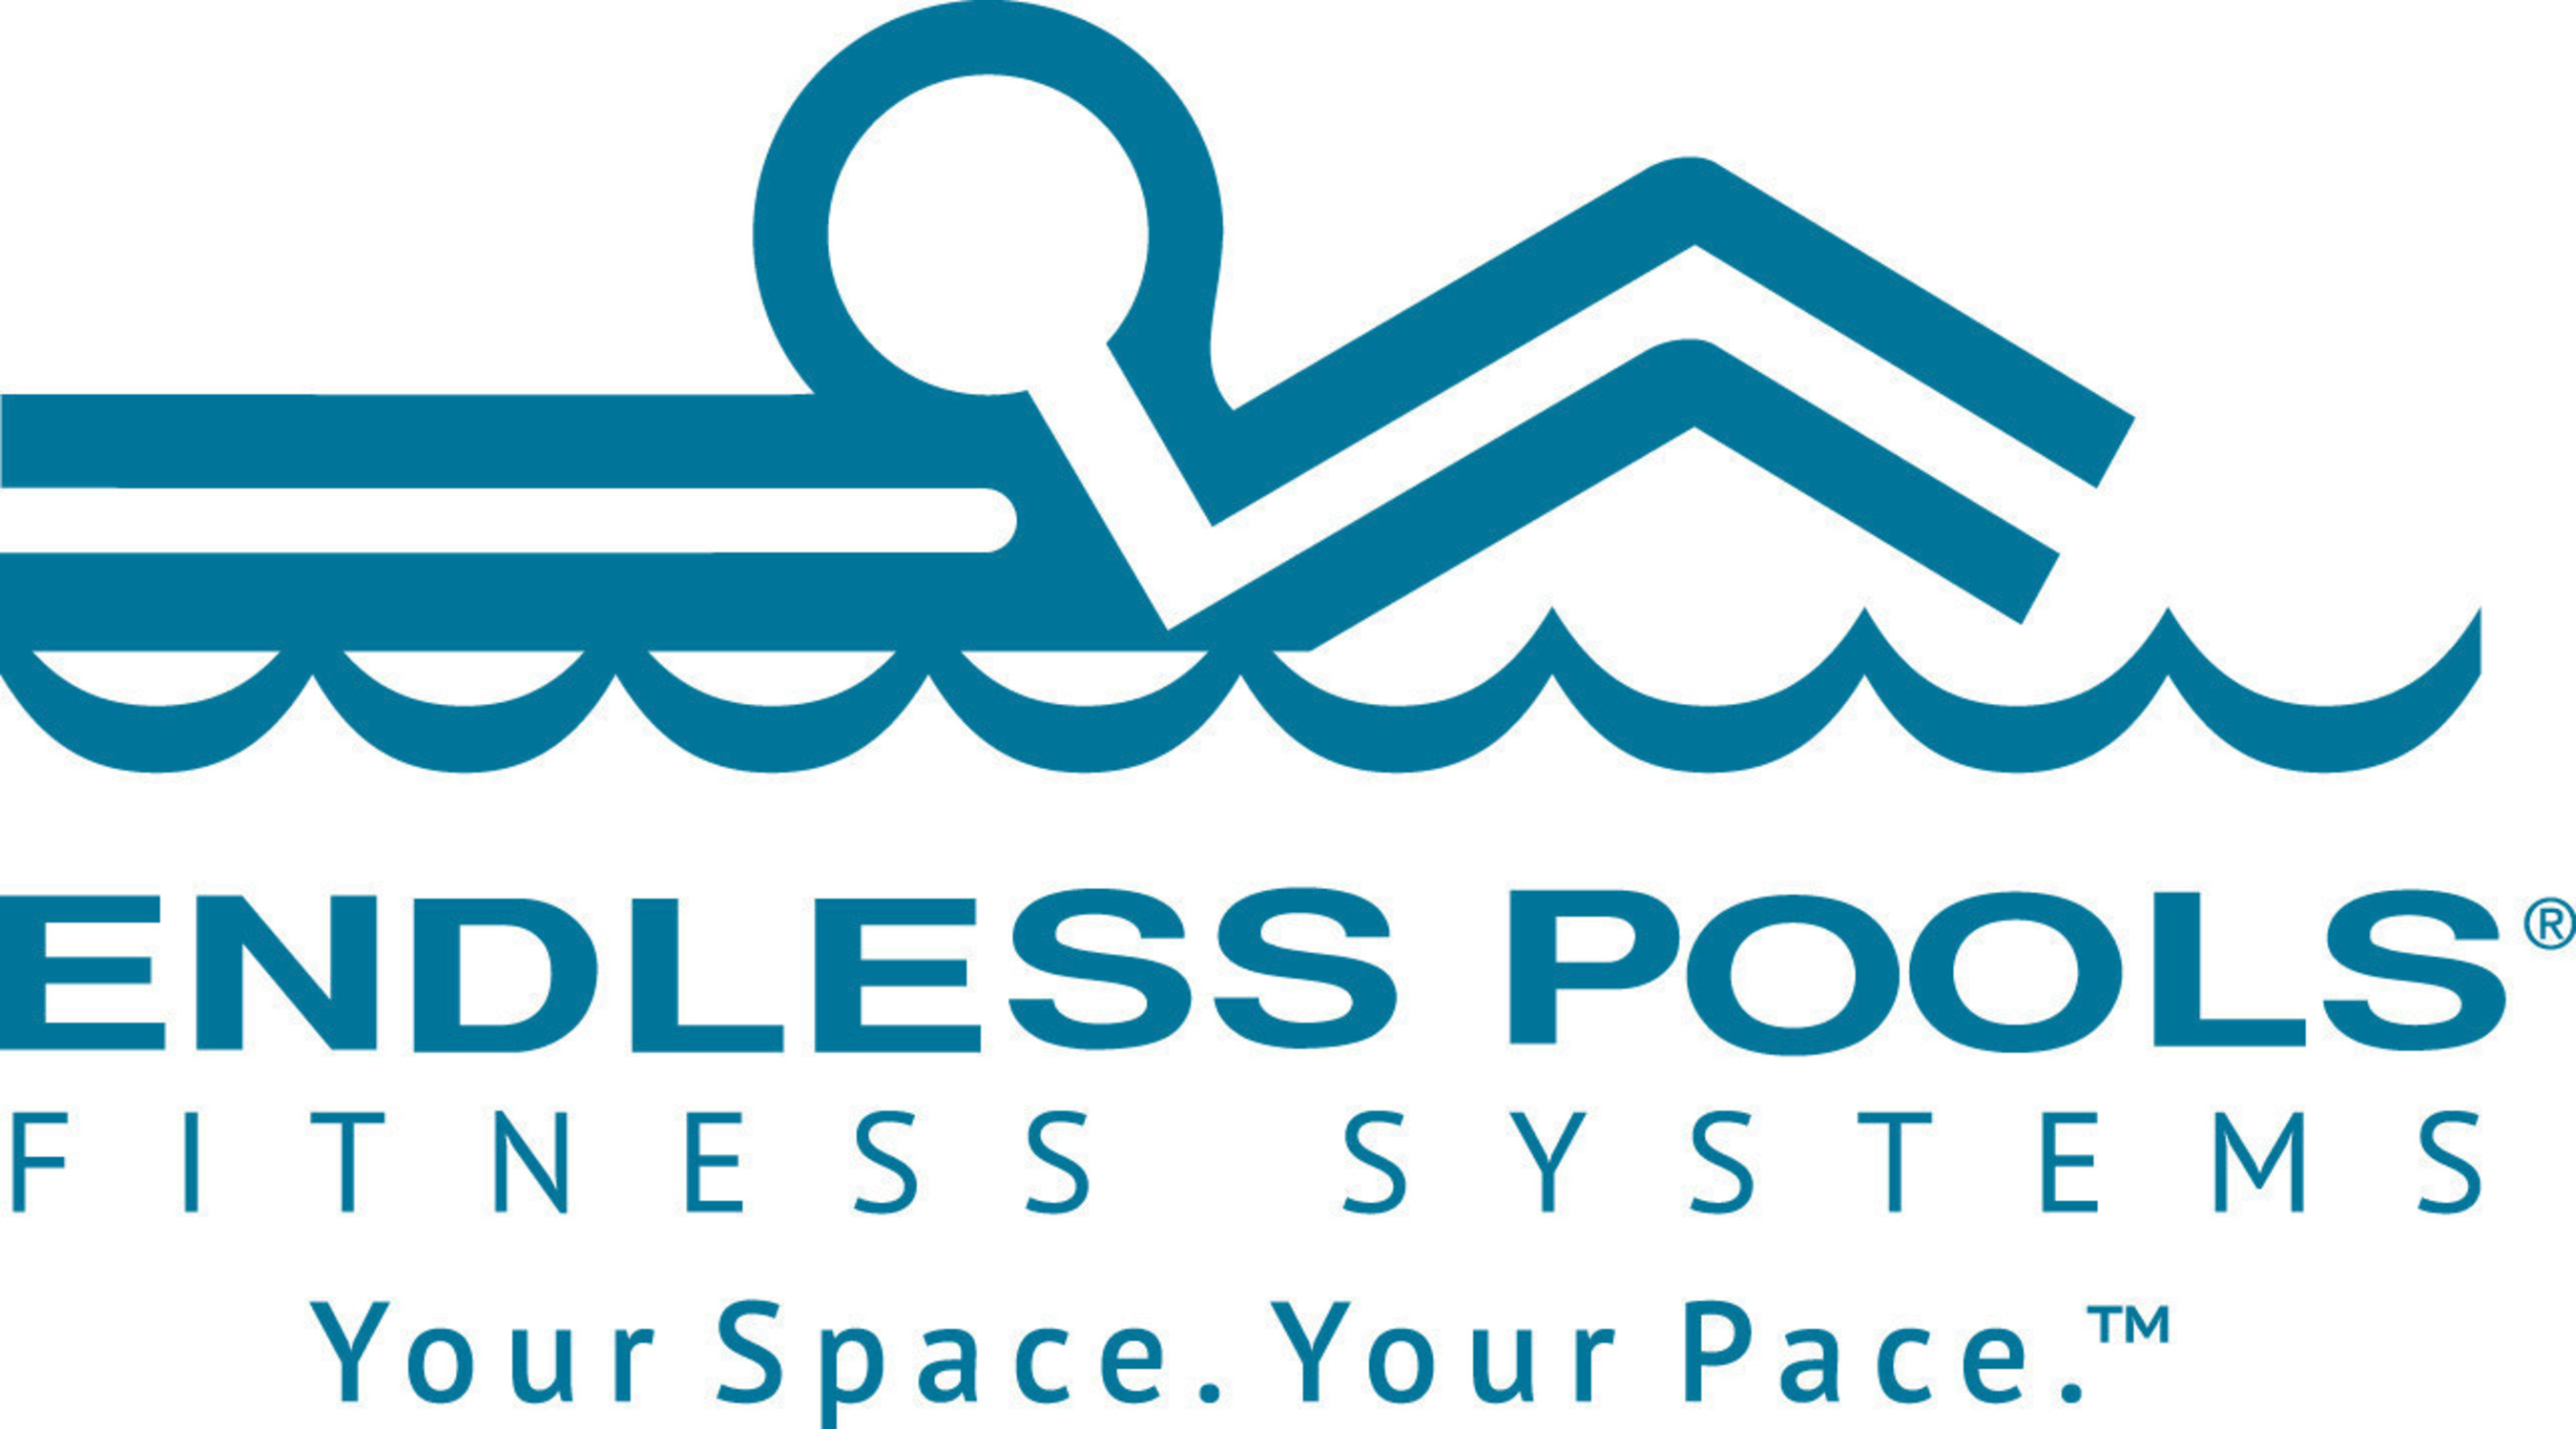 Endless Pools(R) has a nearly 30-year history as an industry leader who pioneered propeller-driven swim-in-place technology. Endless Pools Fitness Systems and SwimCross(TM) Exercise Systems are made by Watkins Wellness(TM). The company is known for the highest ethics and integrity, and is a division of Masco Corporation, a Fortune 500 company whose products include such trusted brands as Hot Spring(R) Spas, Caldera(R) Spas, Delta(R) faucets, KraftMaid(R) cabinets and Behr(R) paints. Visit www.EndlessFitness.com